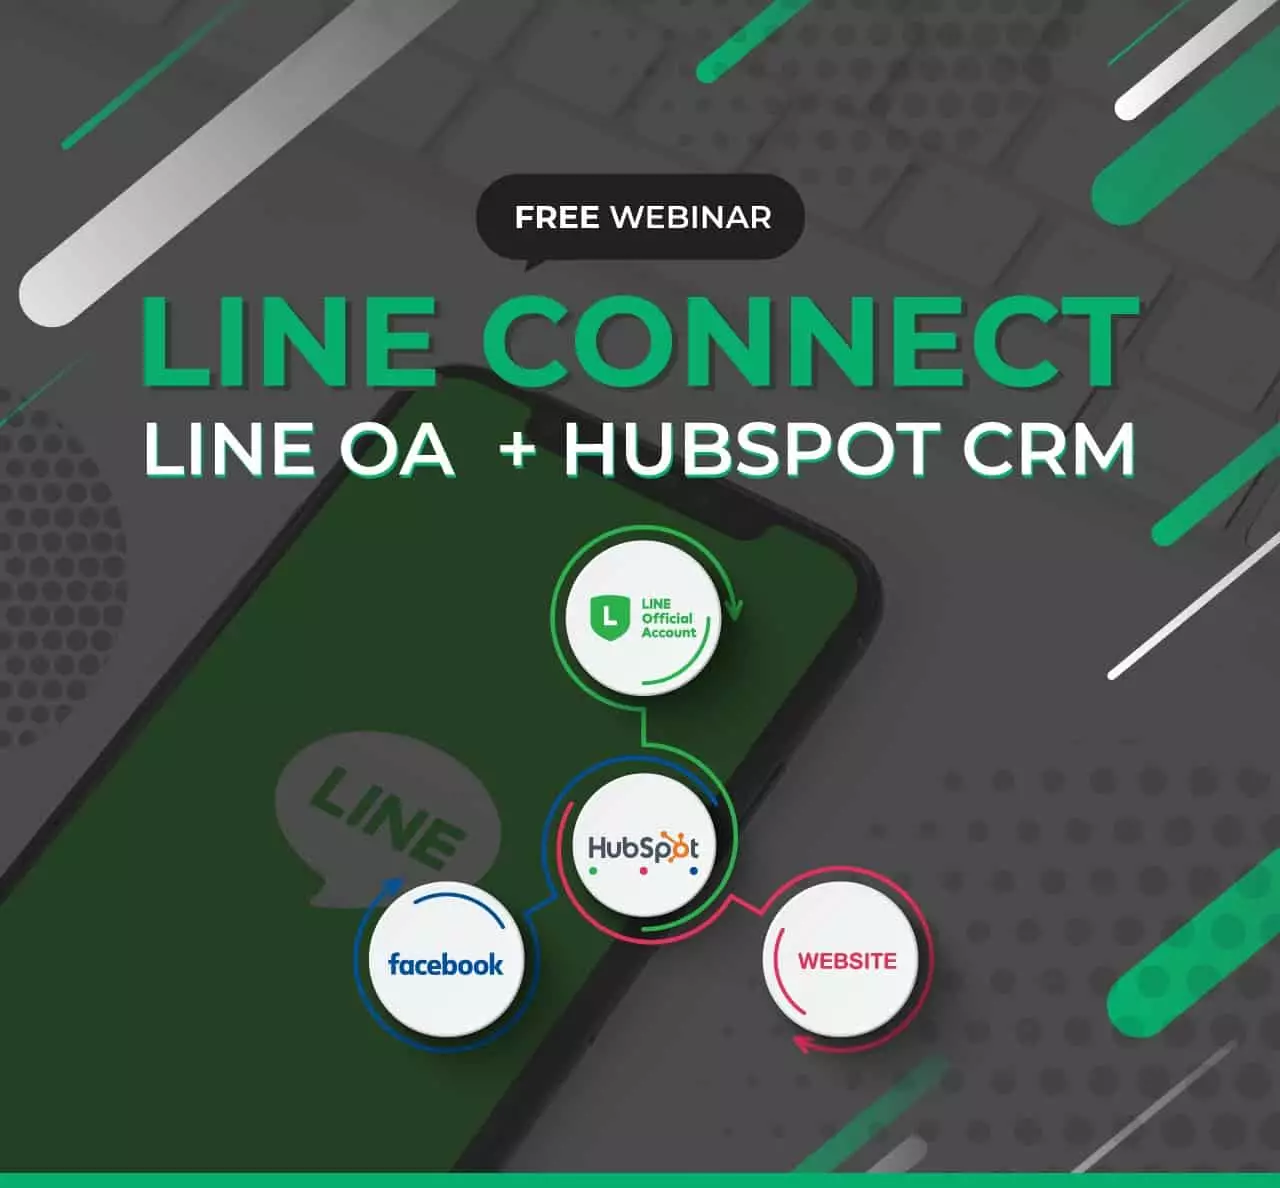 LINEConnect